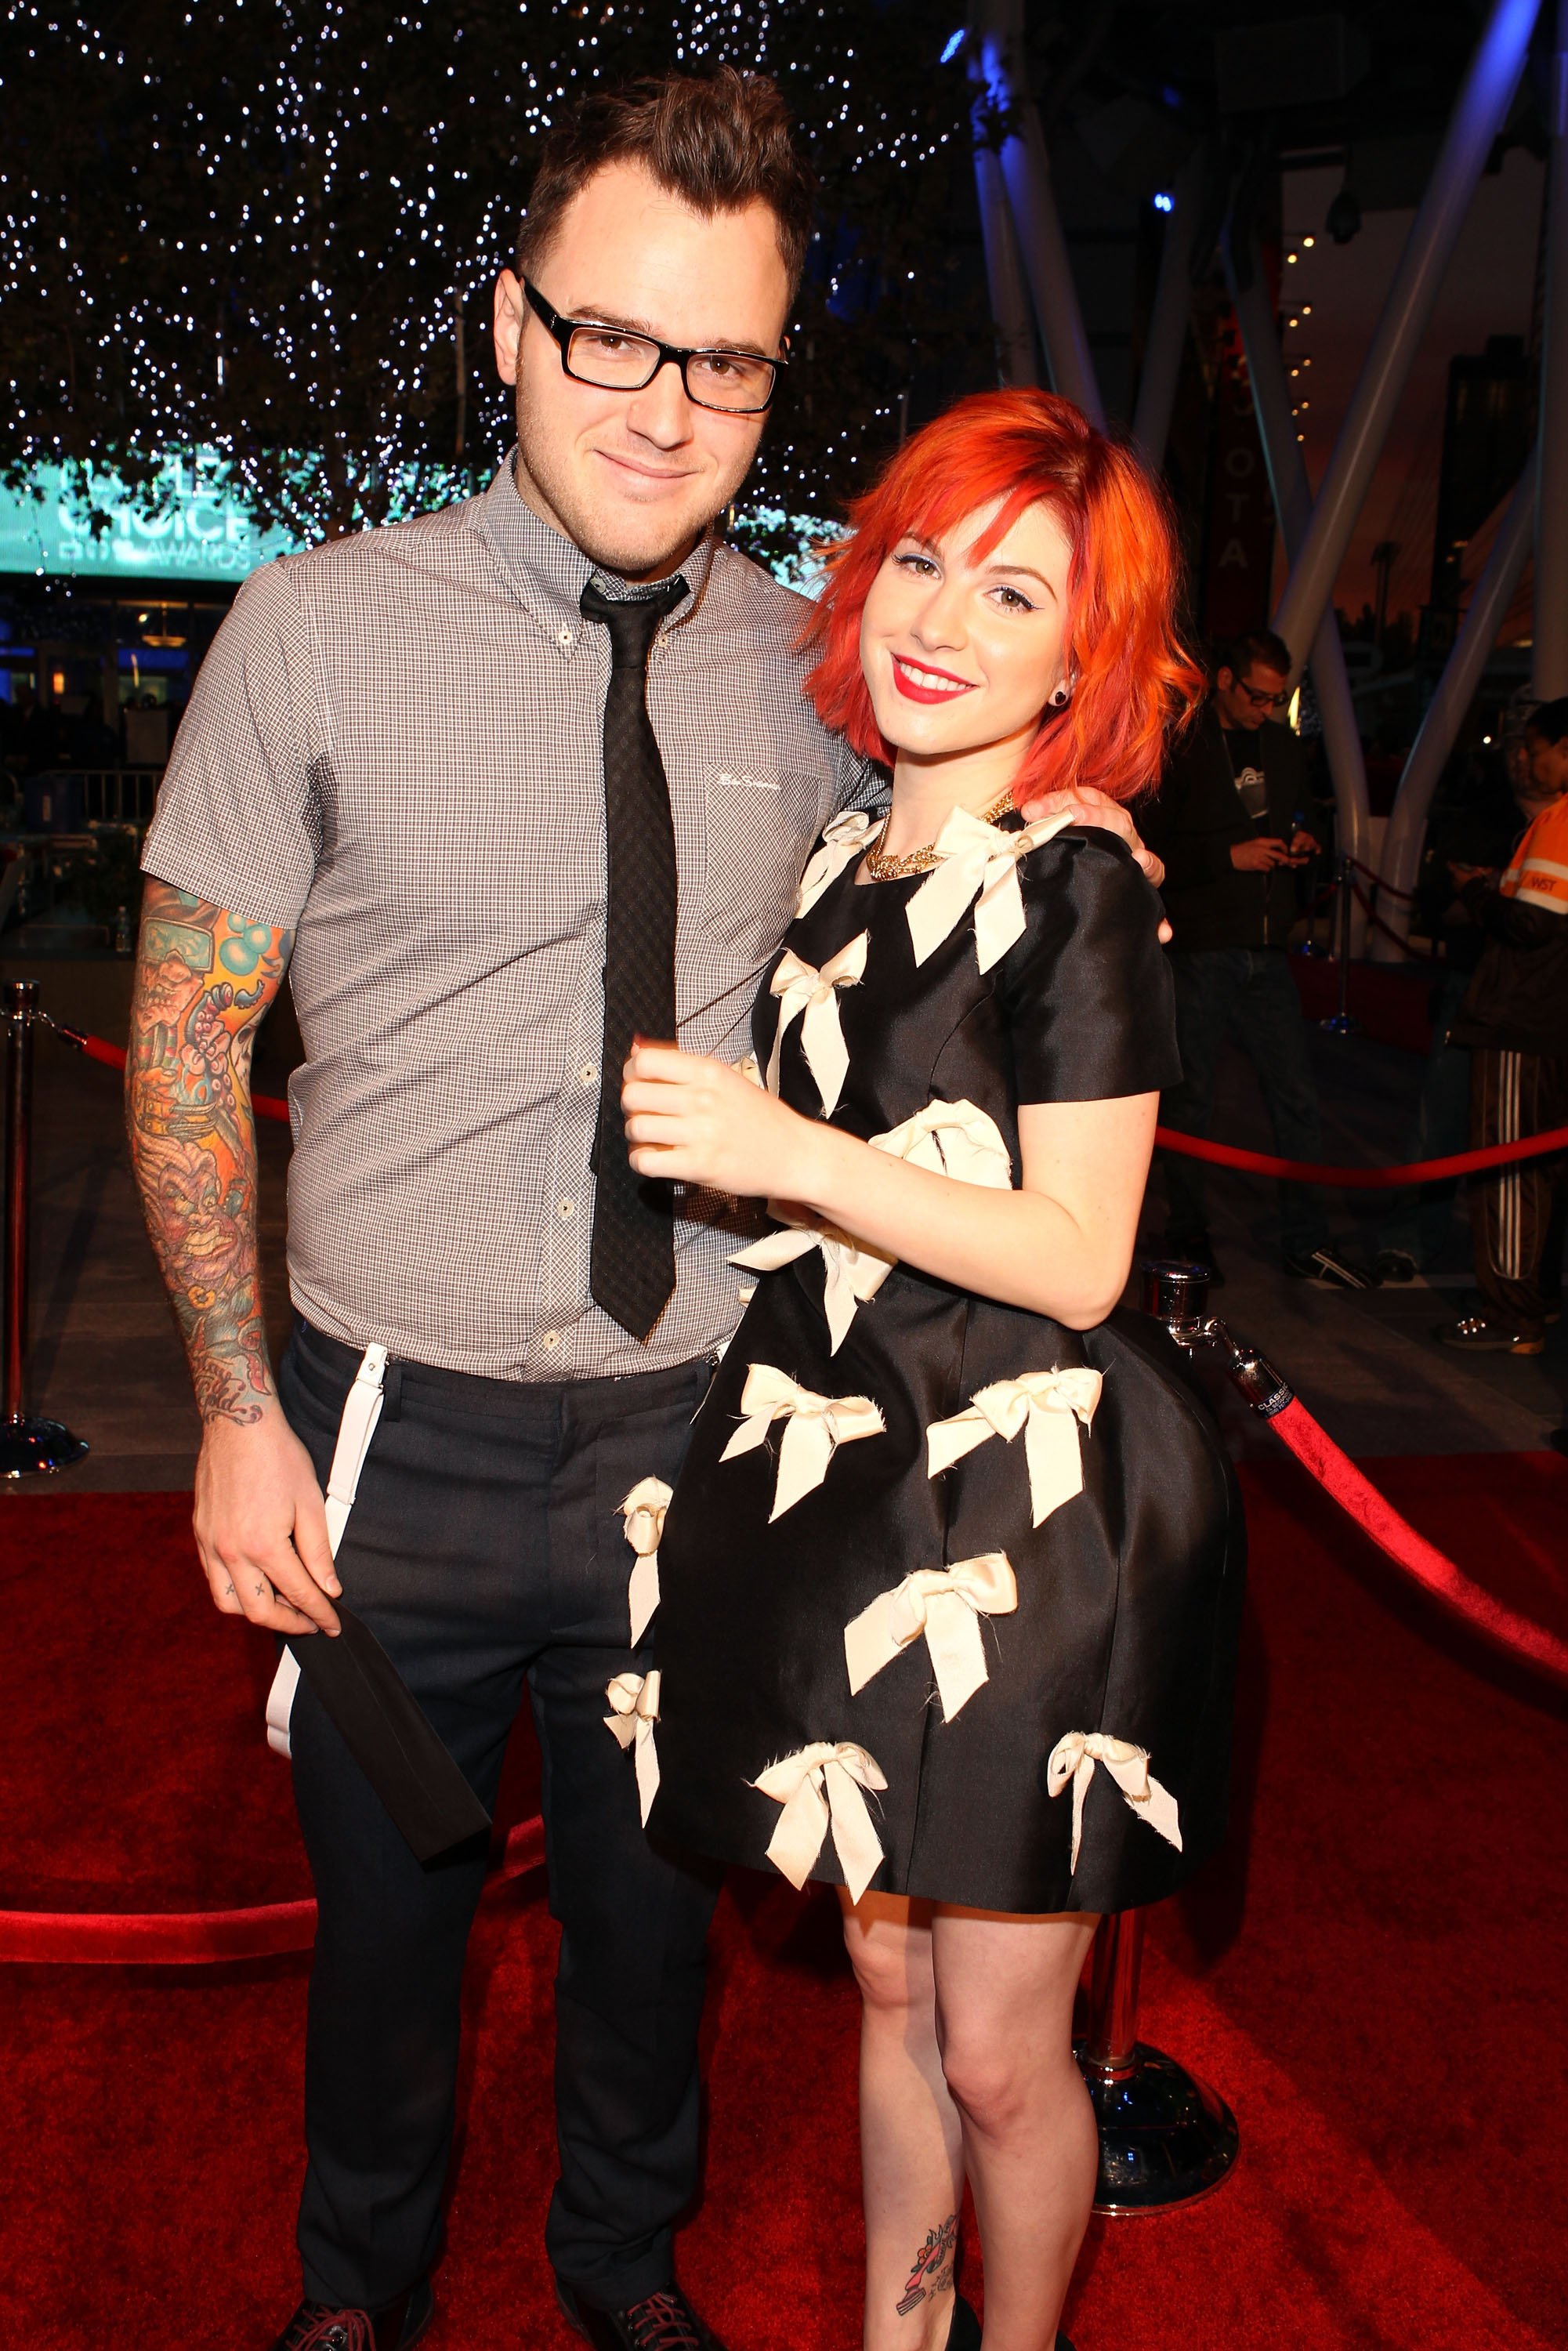 Chad Gilbert and singer Hayley Williams are photographed as they arrive at the People's Choice Awards 2010, on January 6, 2010, in Los Angeles. | Source: Getty Images